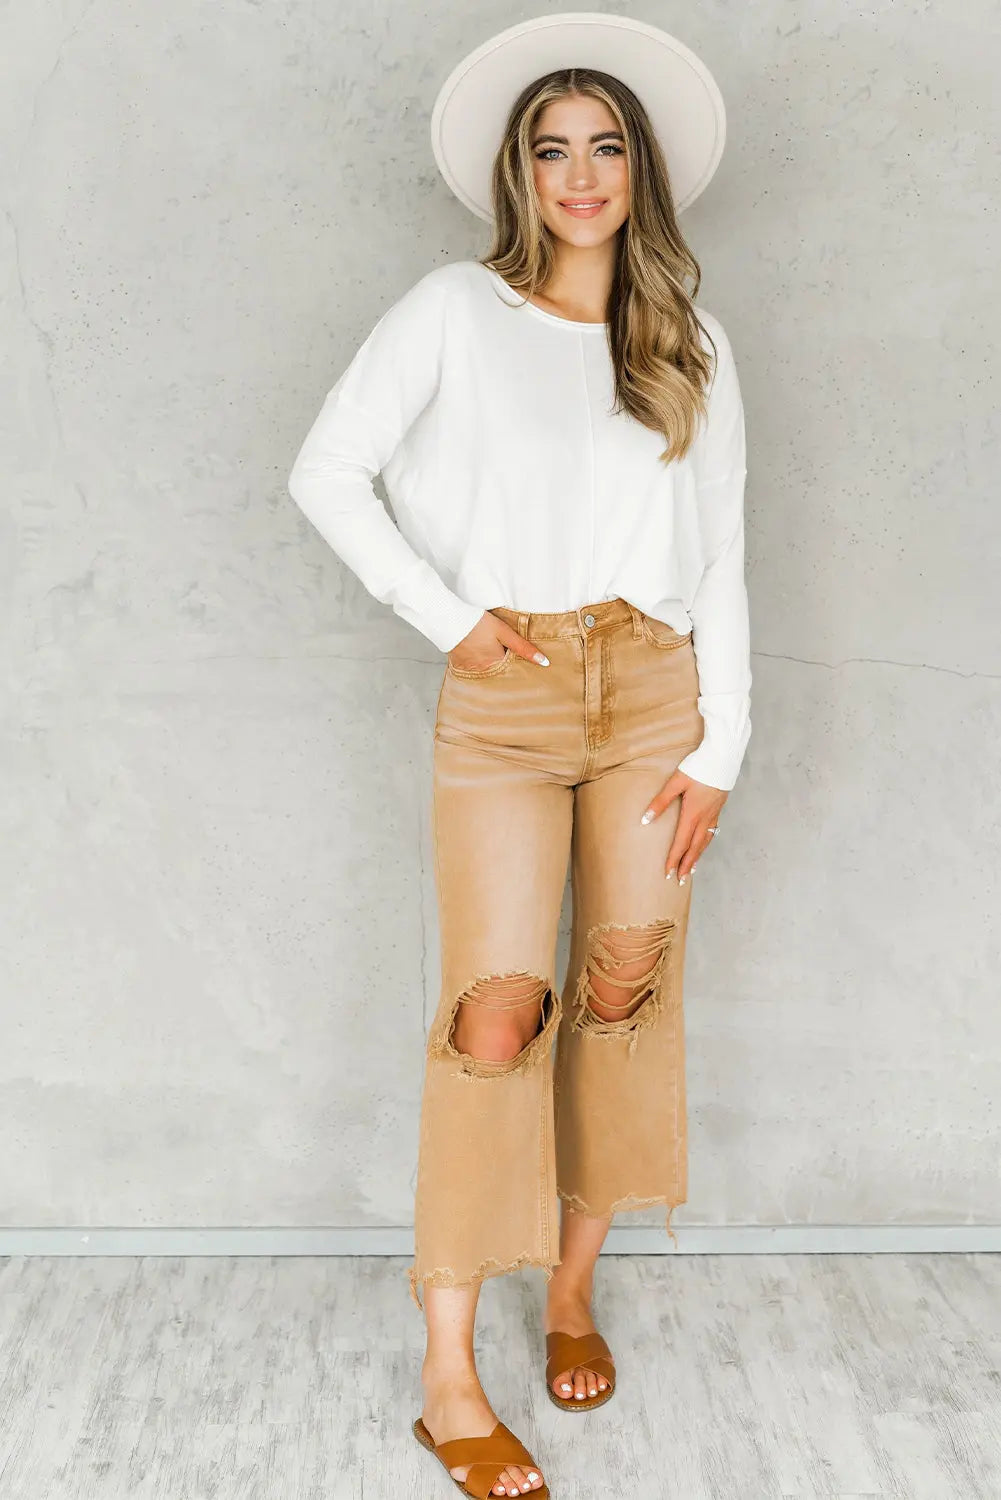 - Distressed Hollow Out High Waist Flare Jeans - 3 colors - womens jeans at TFC&H Co.